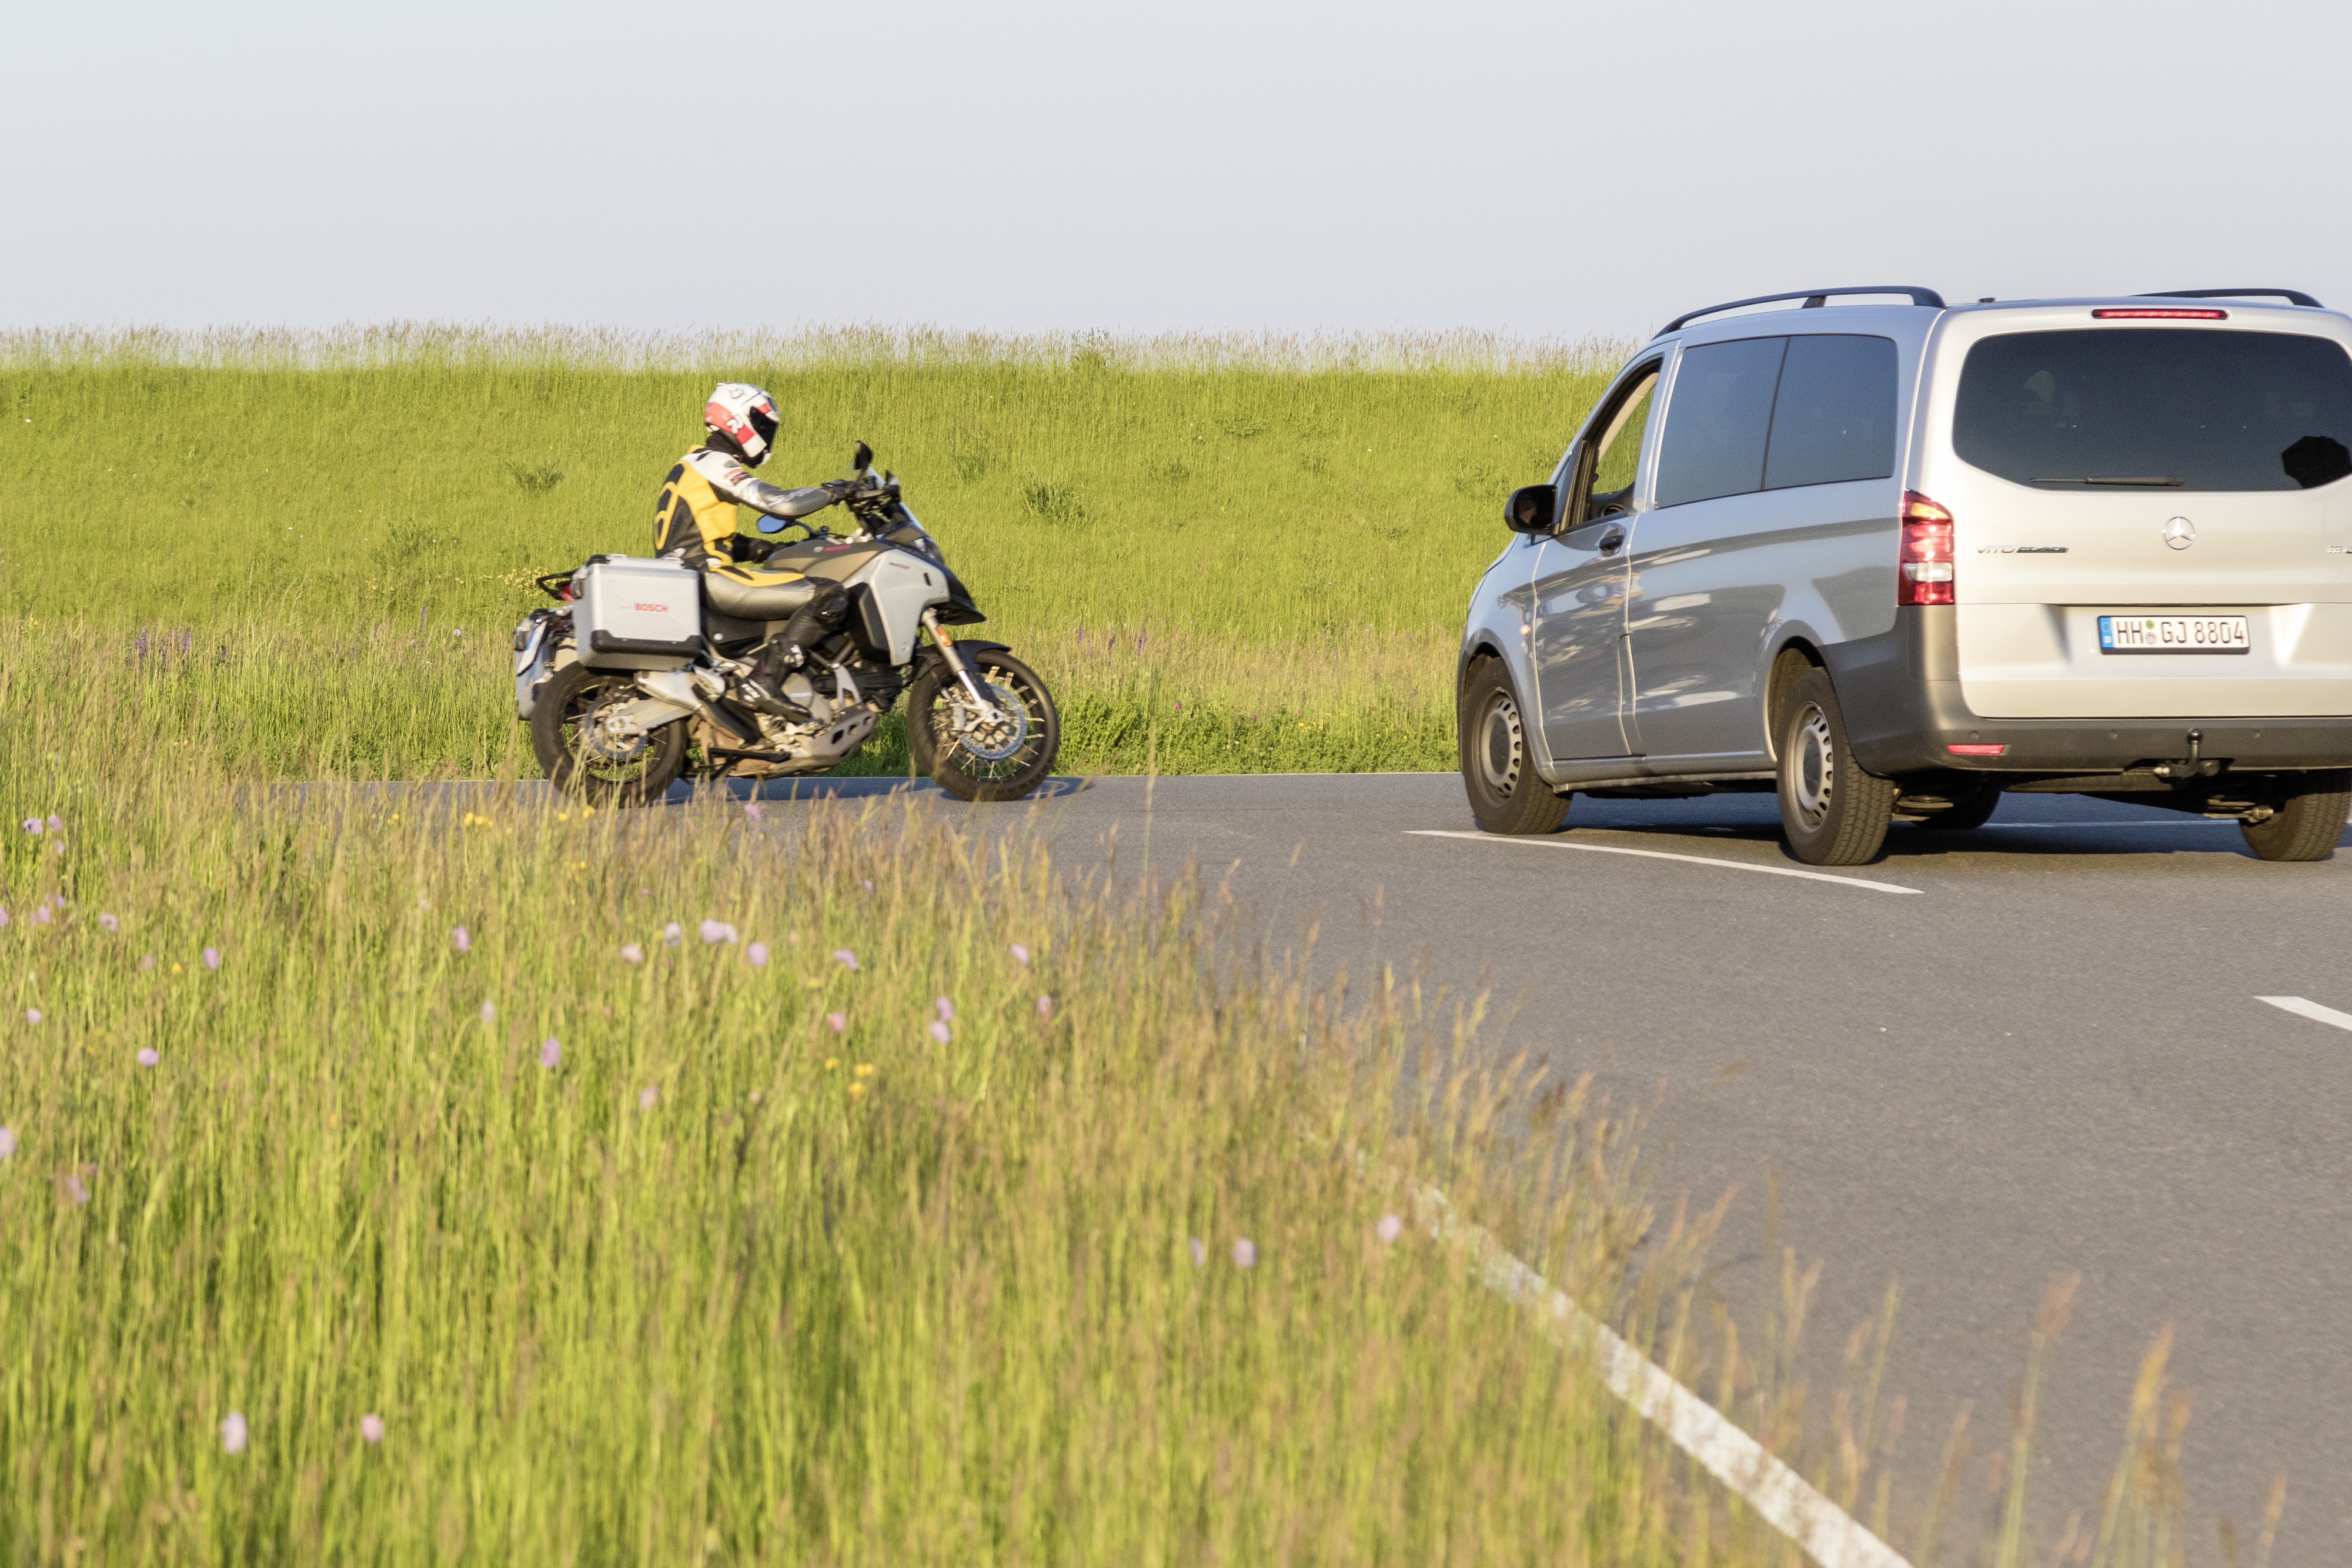 Connectivity could prevent nearly one-third of motorcycle accidents